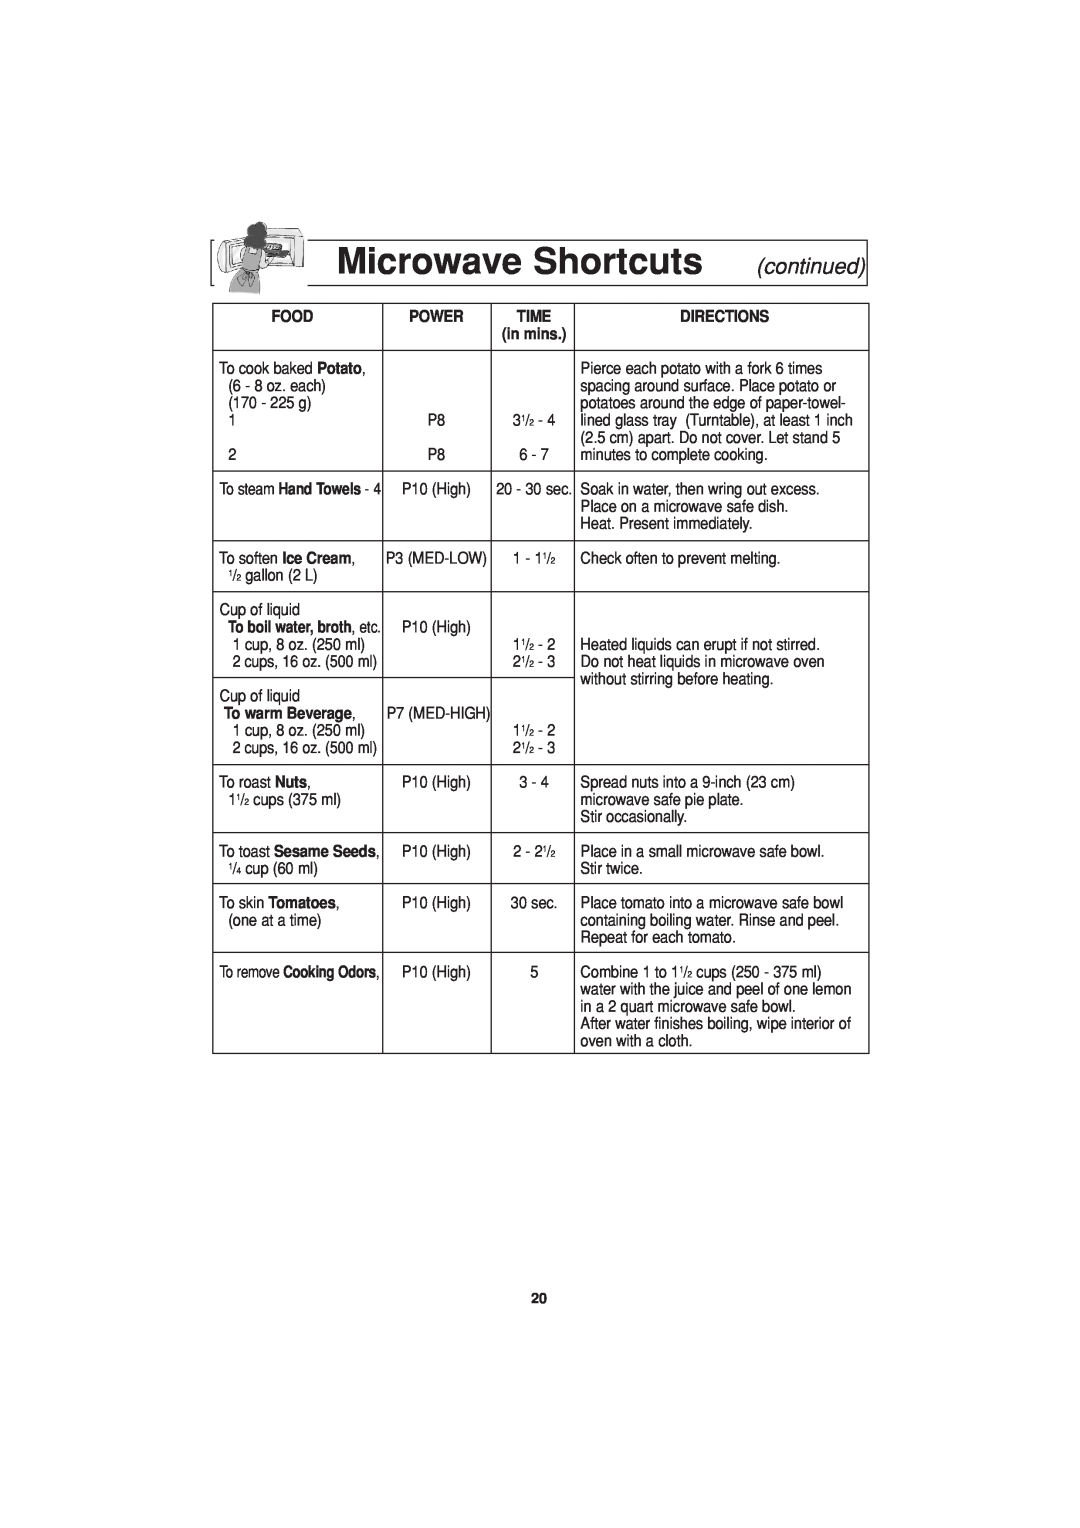 Panasonic NN-H624 operating instructions Microwave Shortcuts, continued, Food, Directions, To warm Beverage 